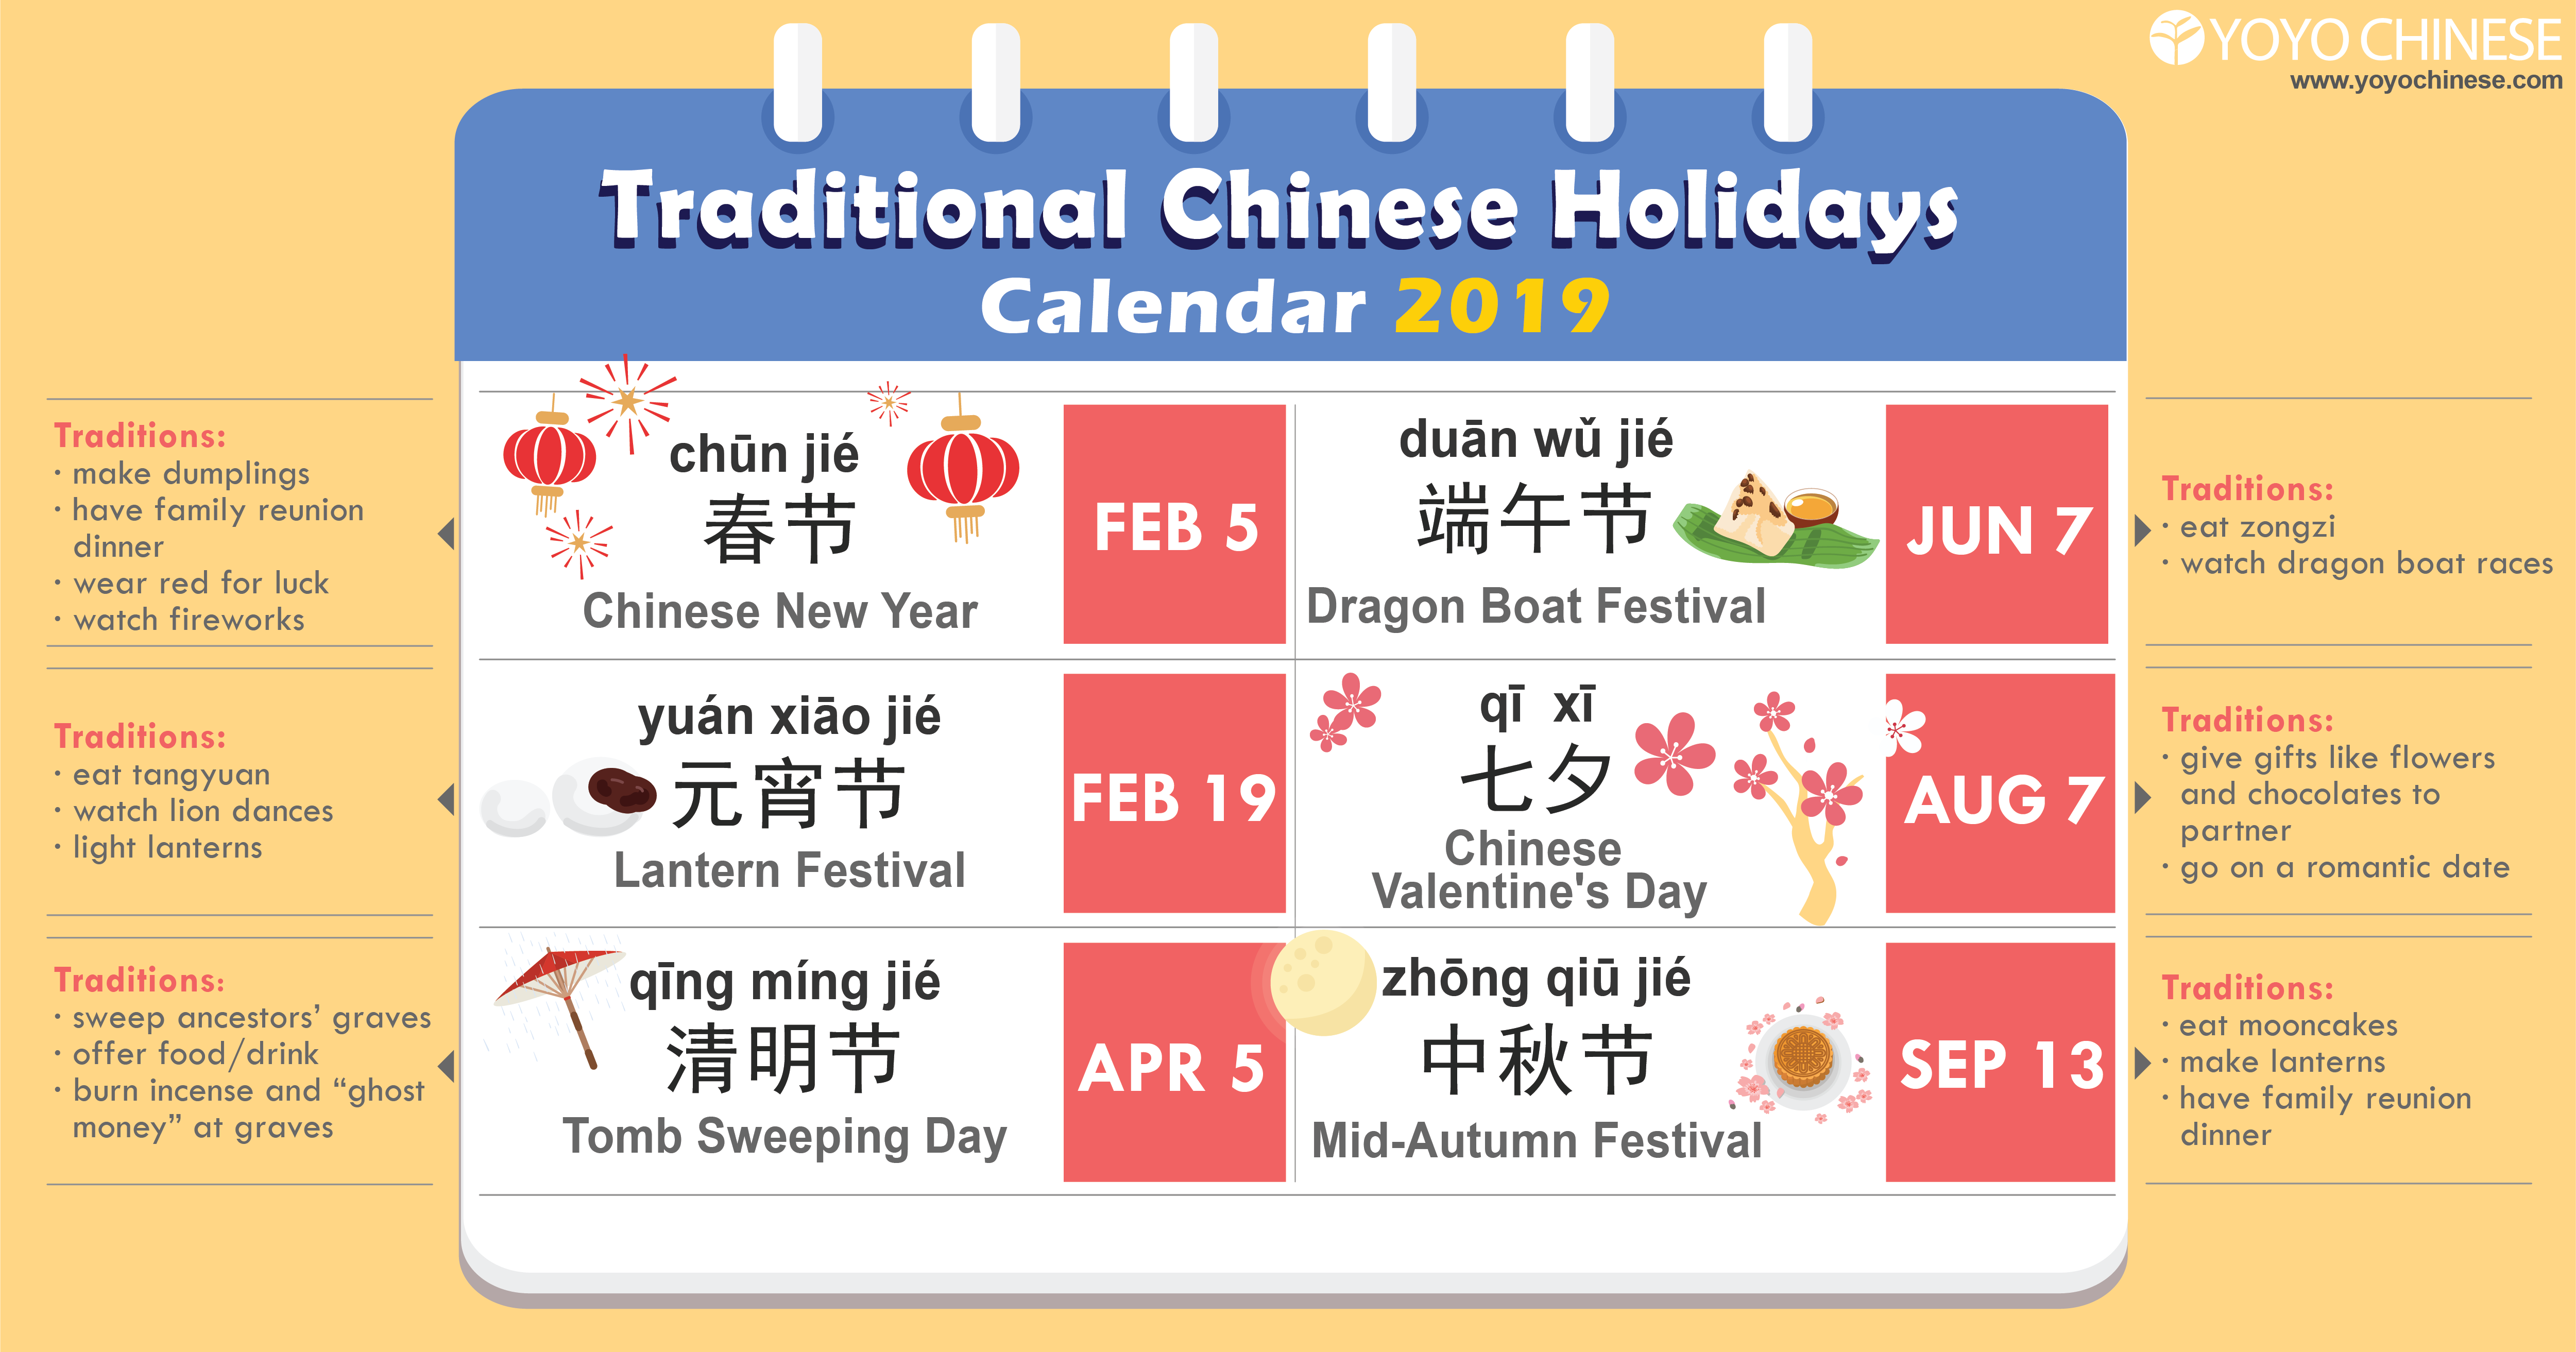 Your Guide to Chinese Holidays in 2019